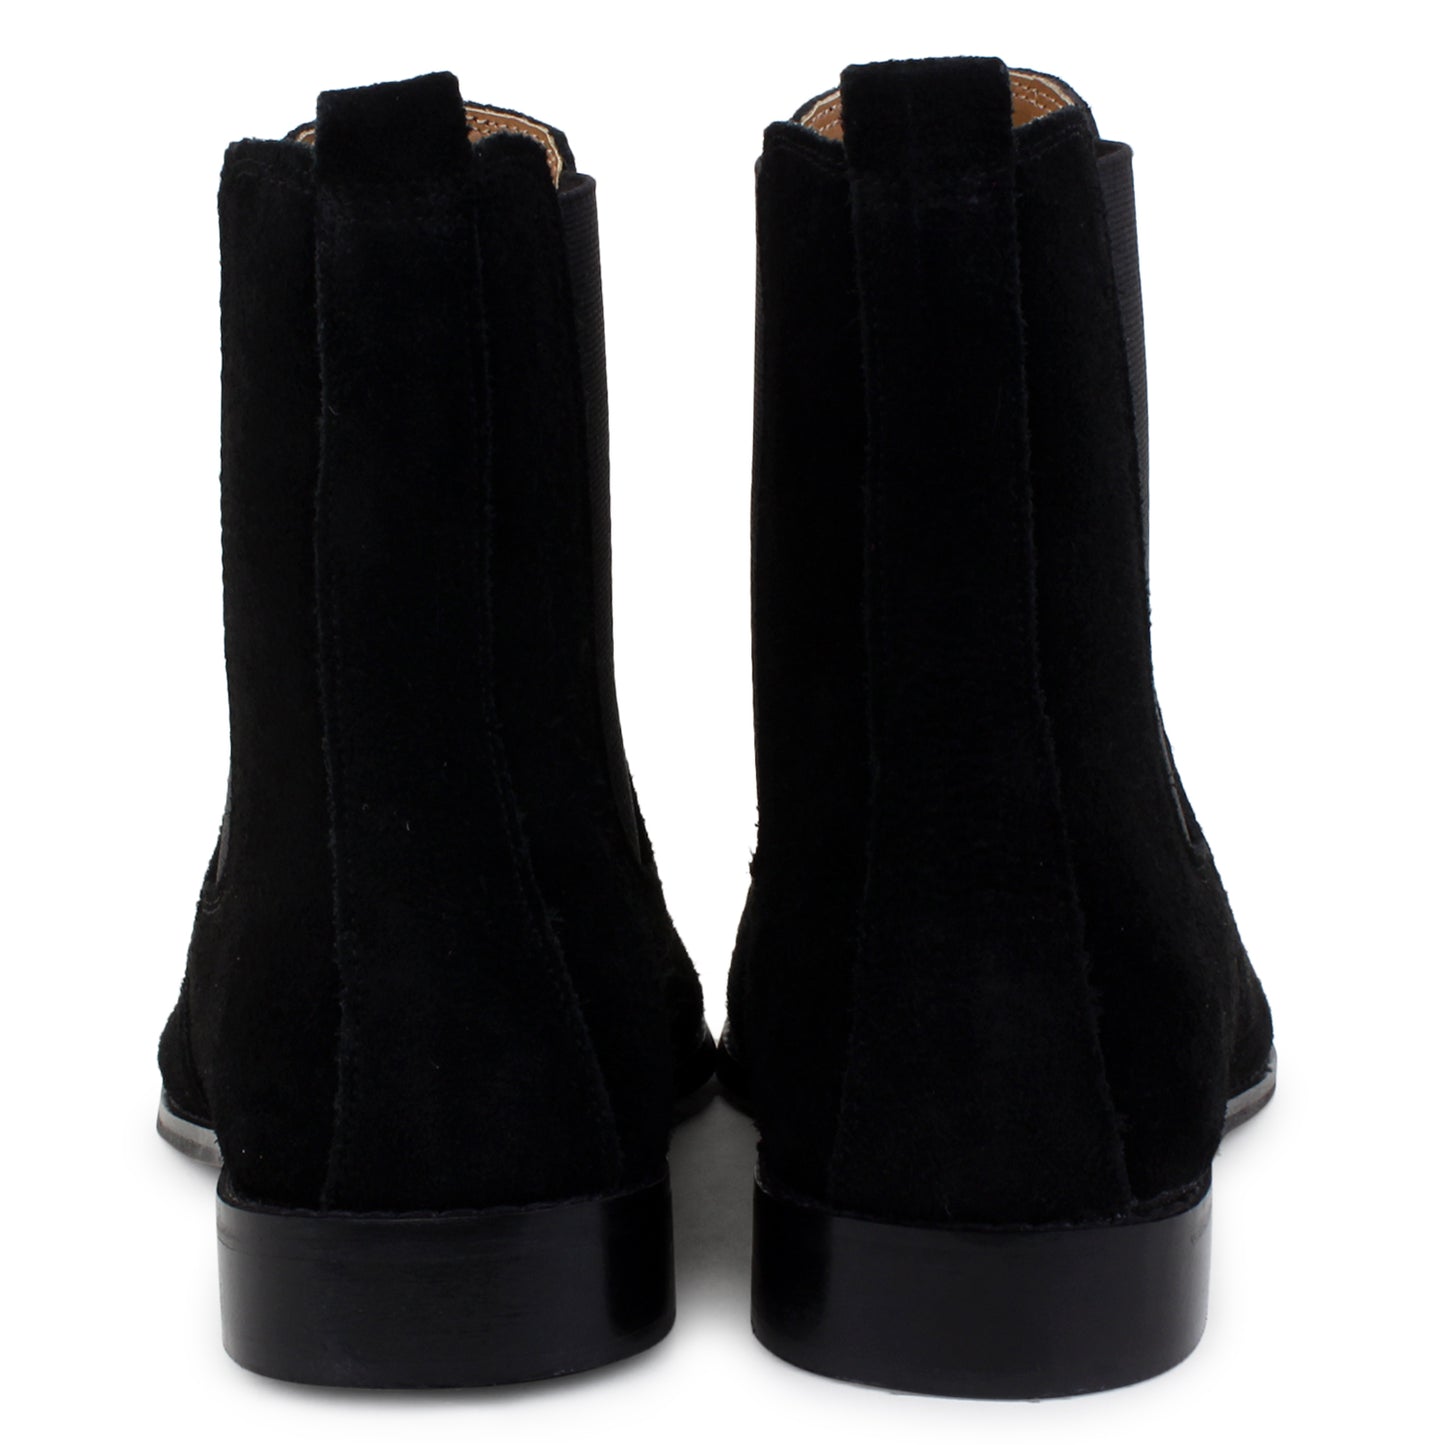 Italian Suede Leather Boots - Black